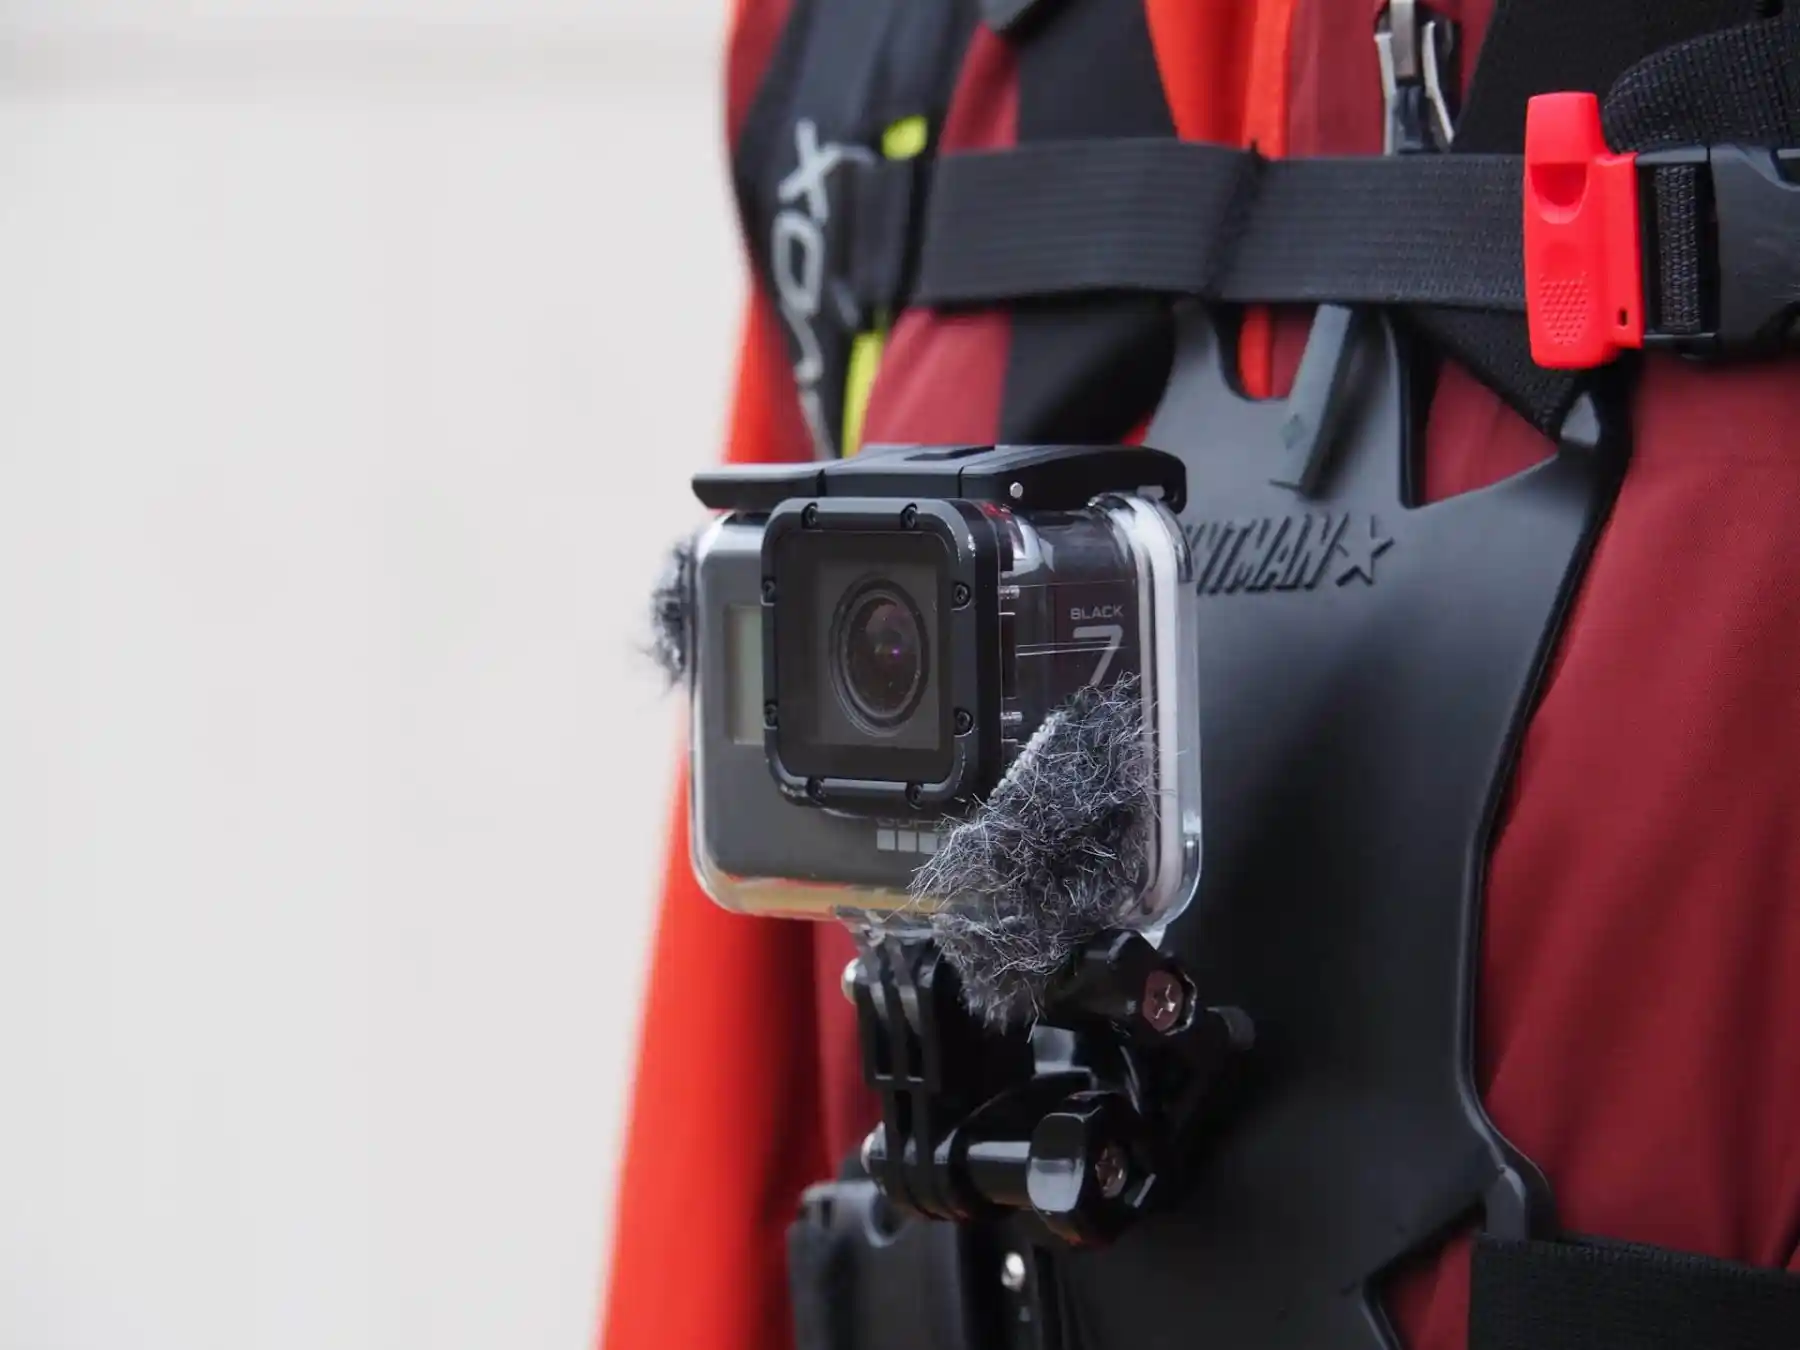 Keith is wearing the GoPro Hero 7 Black mounted on the Stuntman Chest Mount system